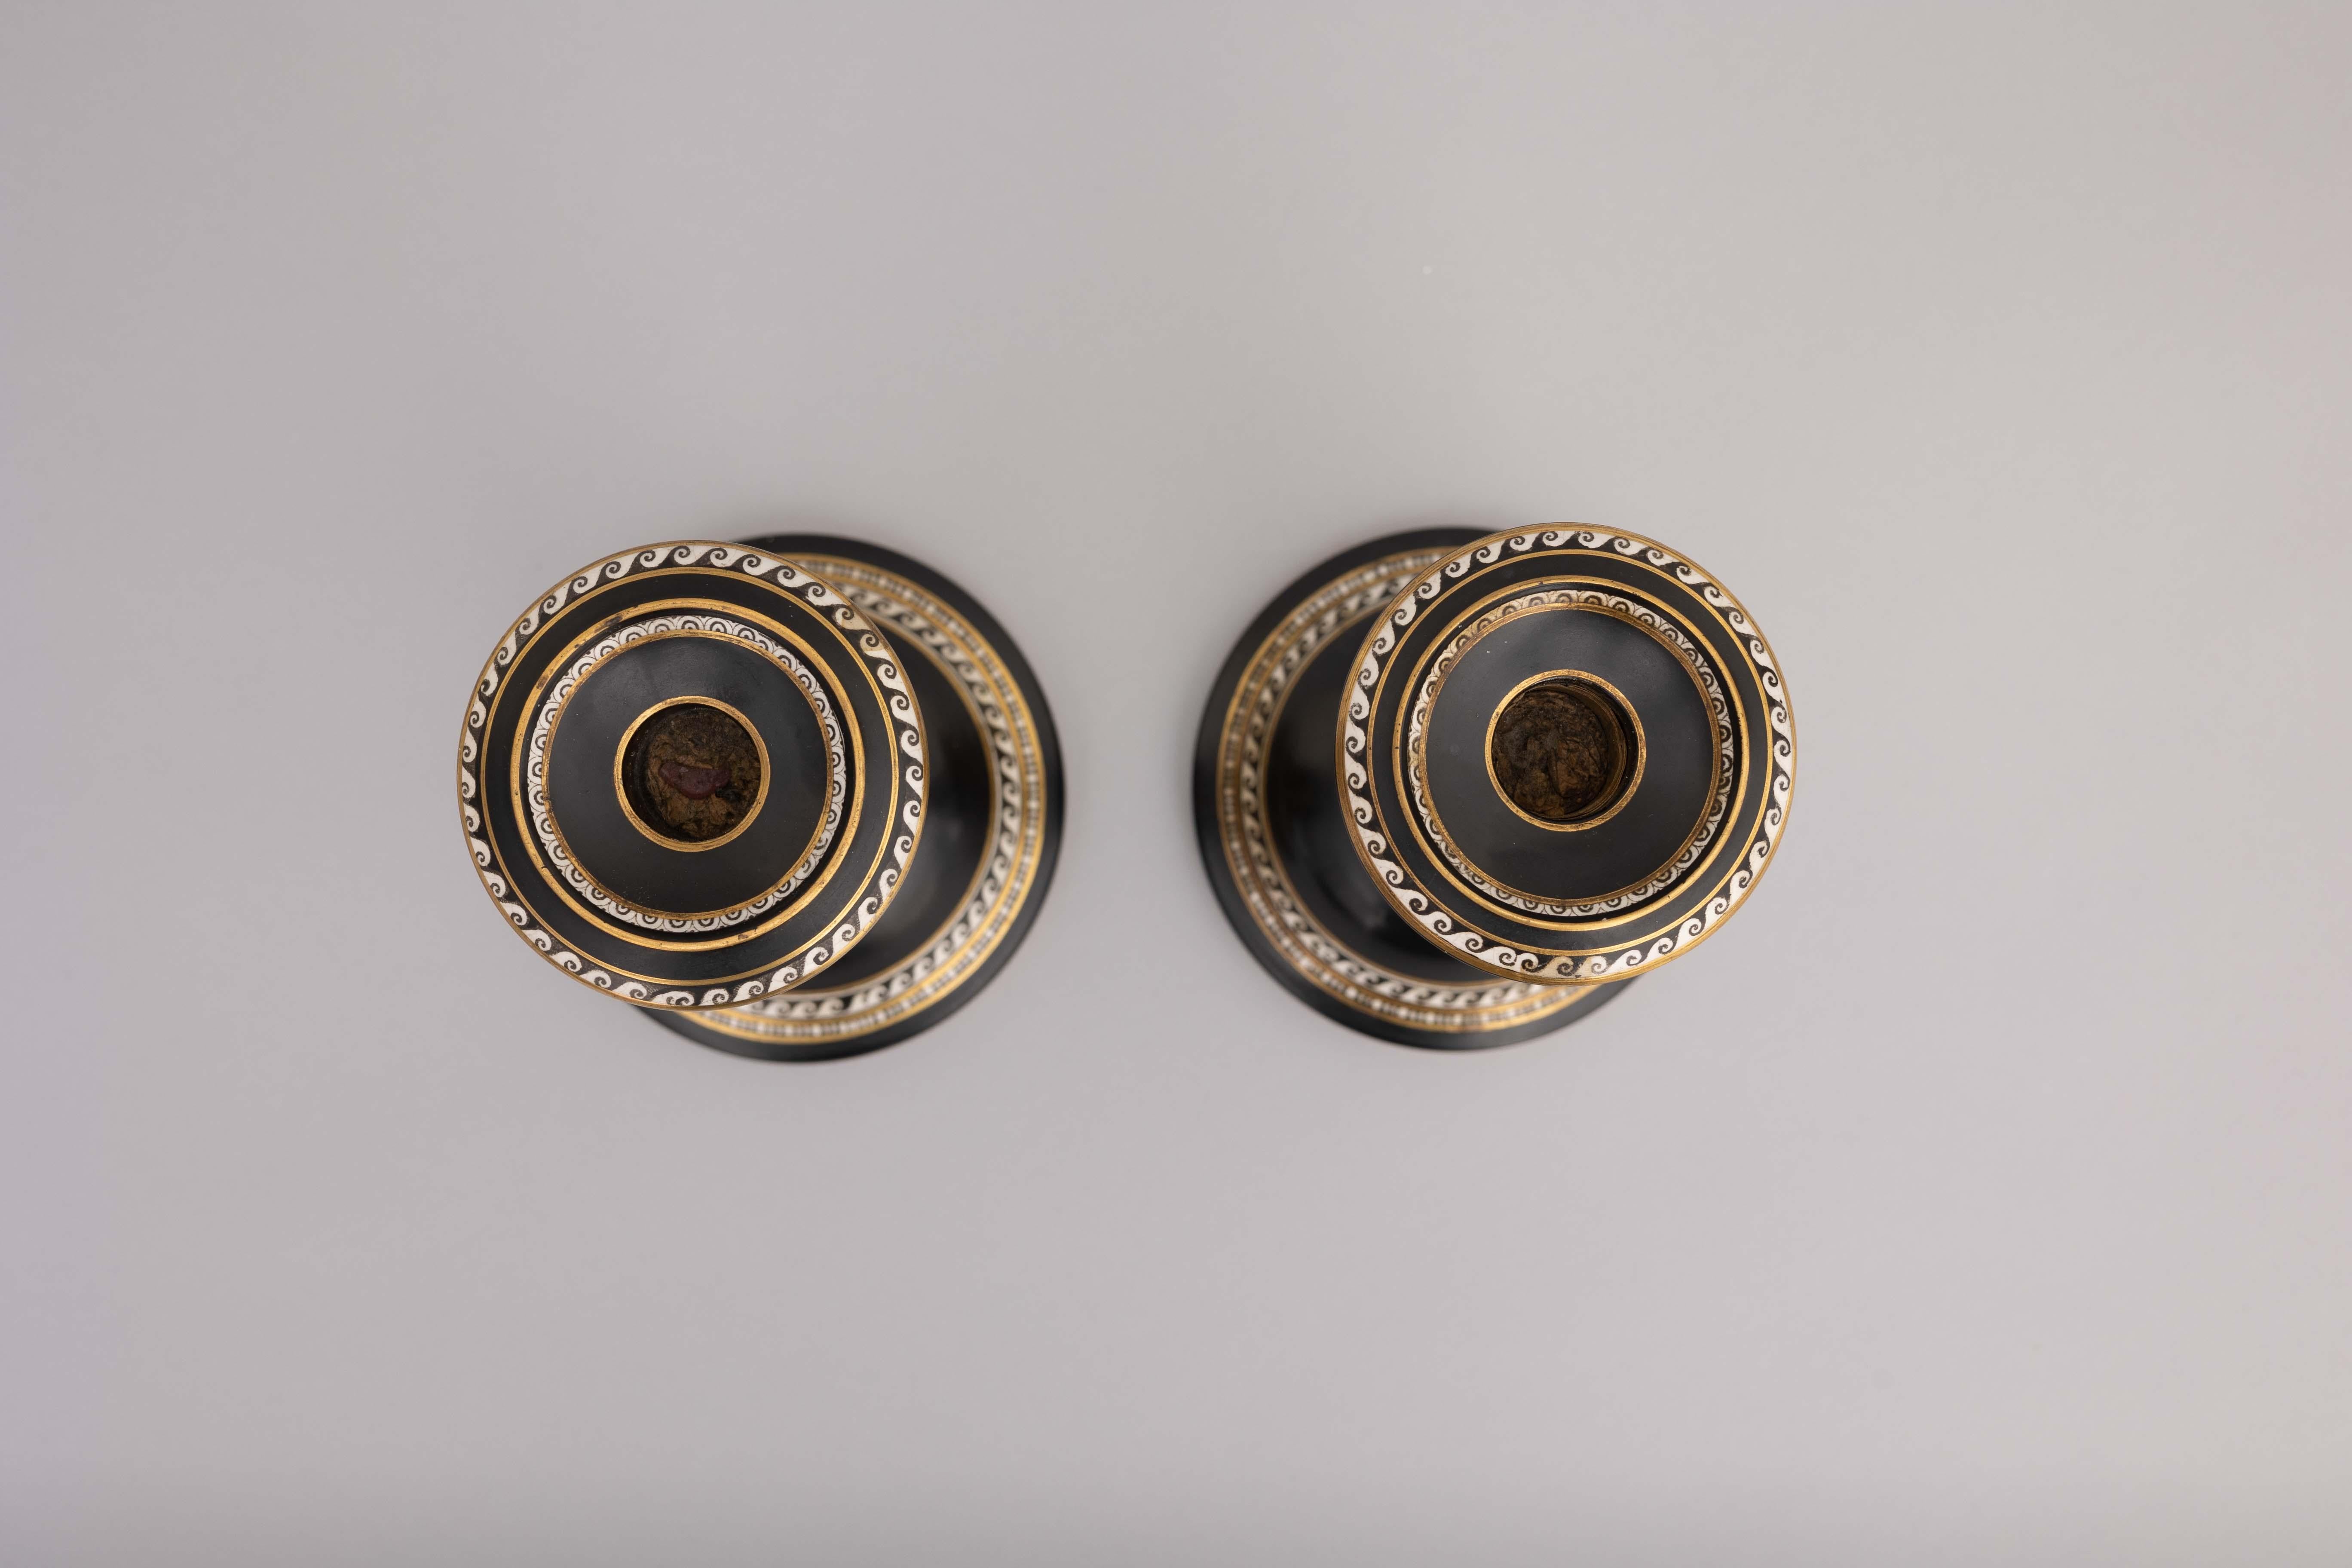 Neoclassical Revival Pair of Neoclassical Pottery Candlesticks by Pratt